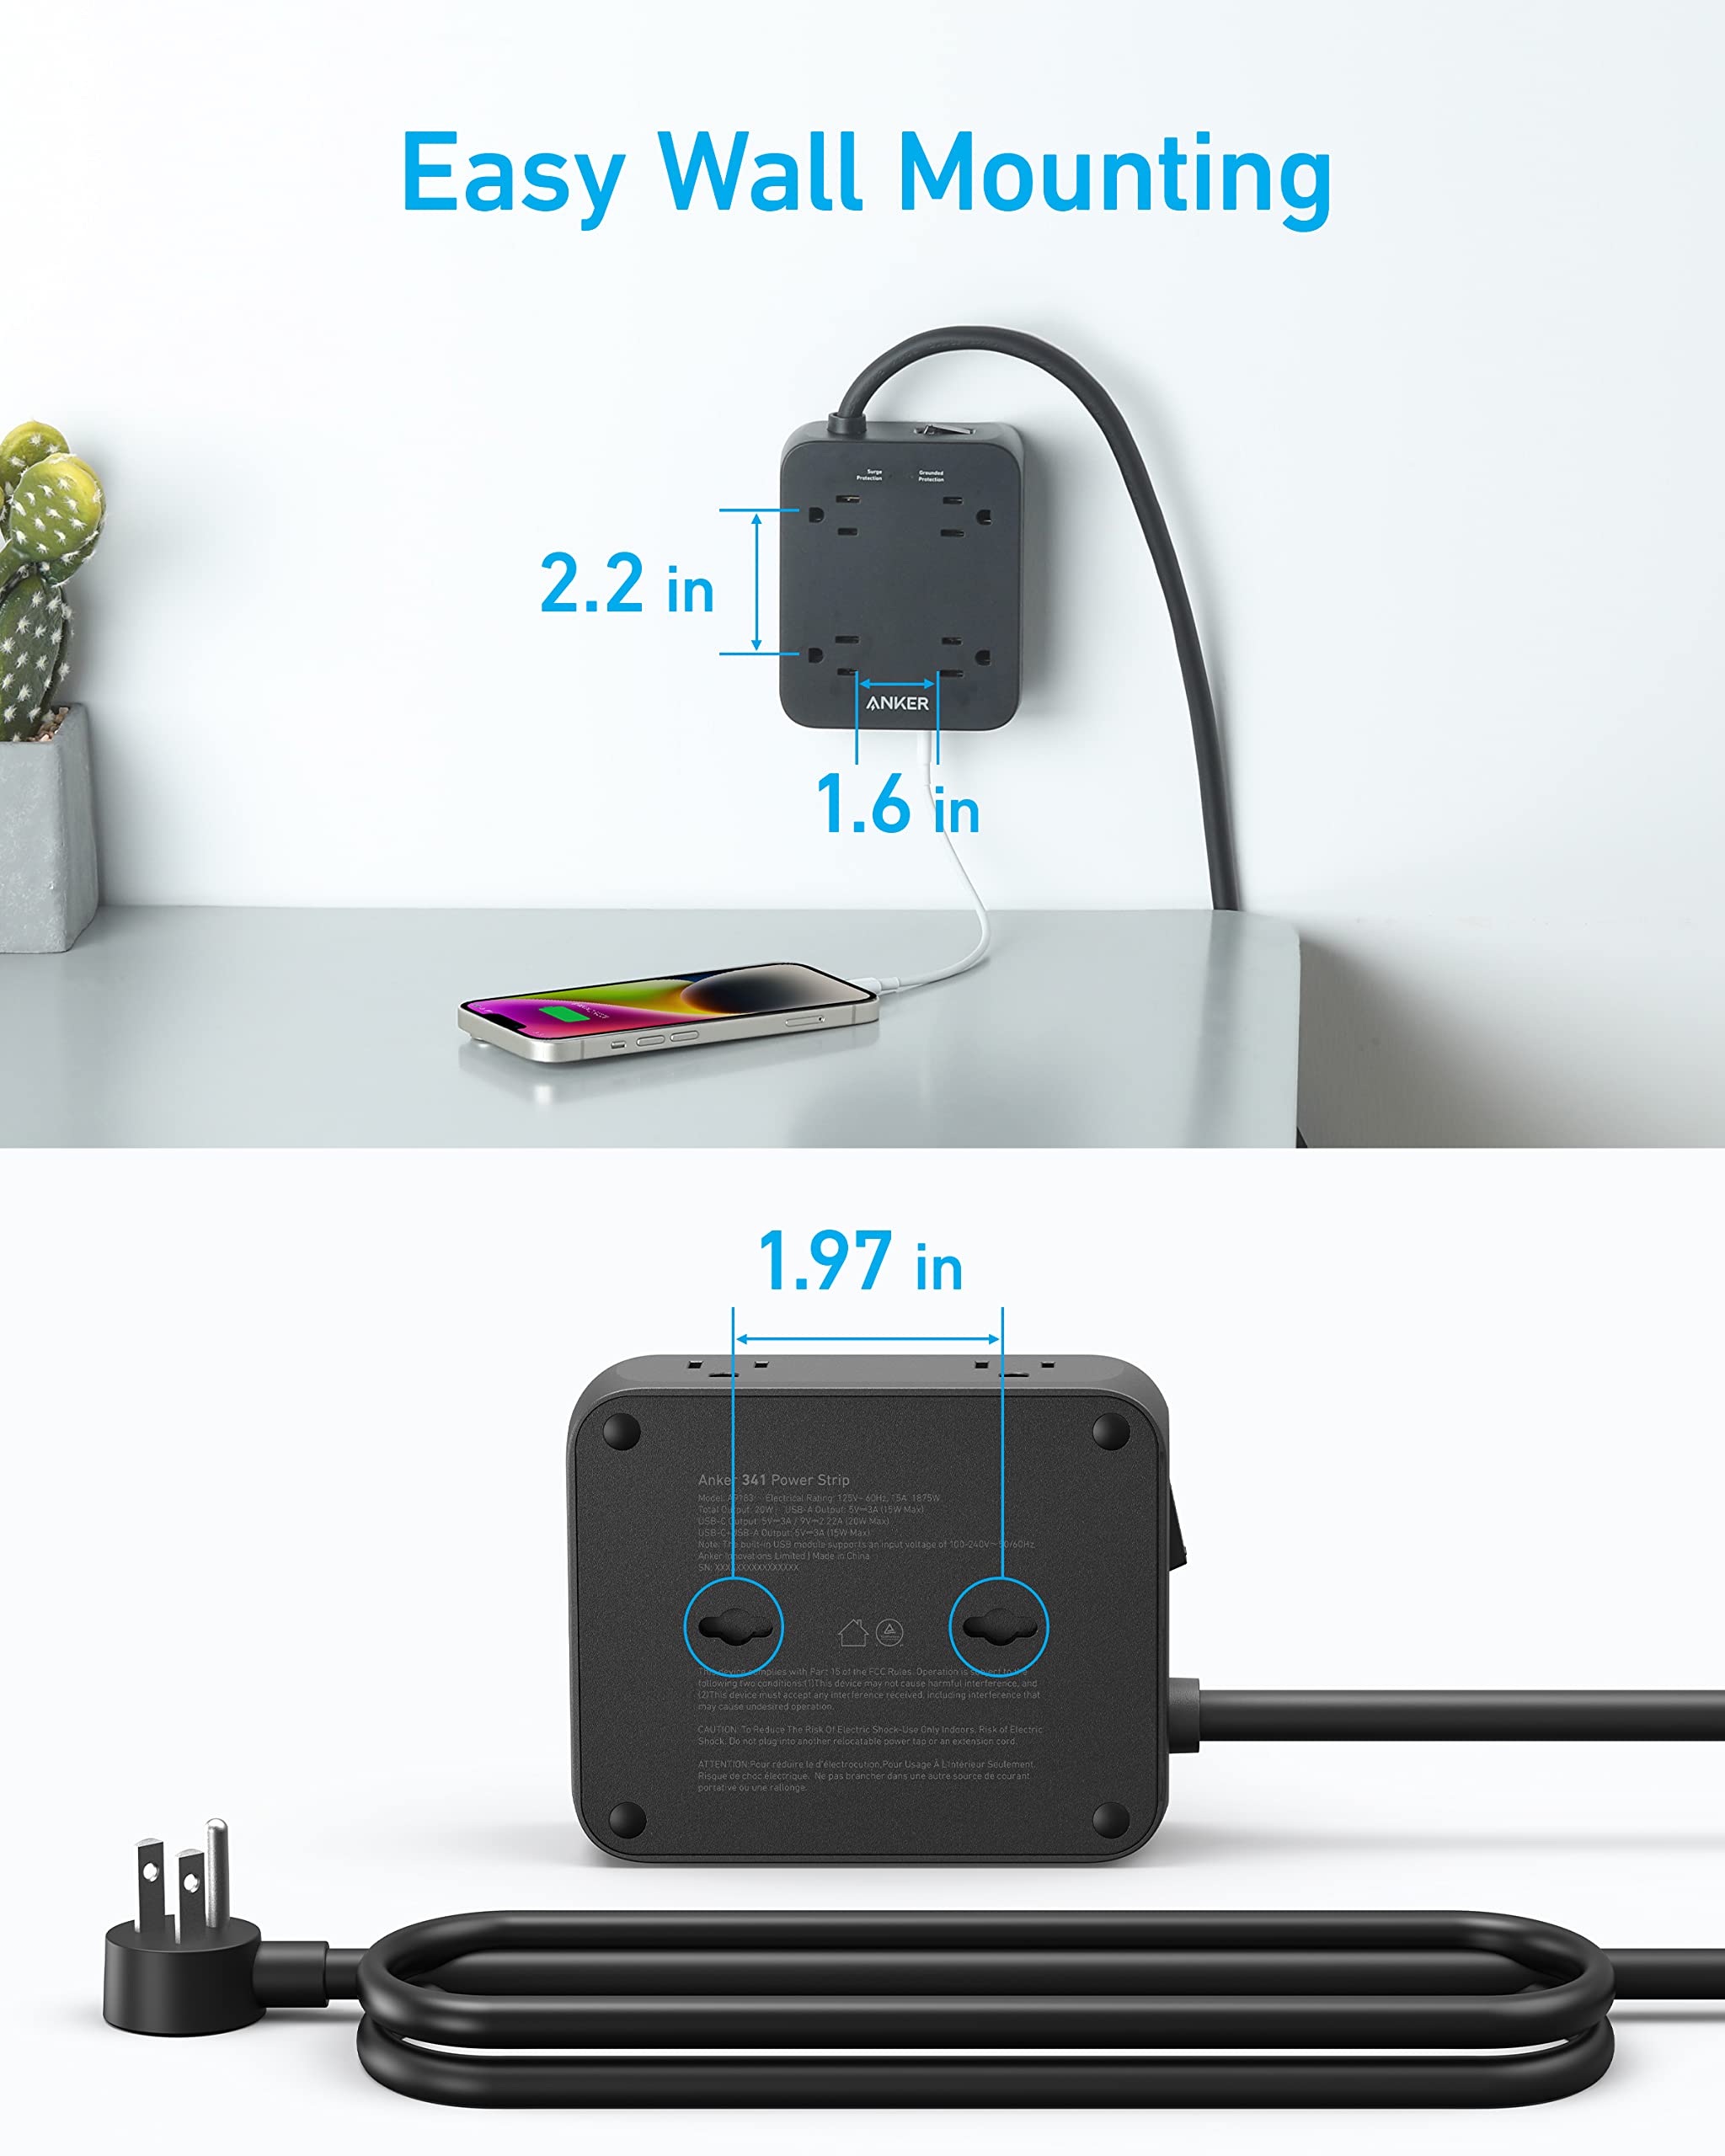 Anker Power Strip with USB Ports,5Ft Flat Plug Extension Cord,Surge Protector(2000J),8 Widely Outlet Extender with 2 USB A Ports and 1 USB C Port,Works with iPhone 14/13,for Home, Office, TUV Listed